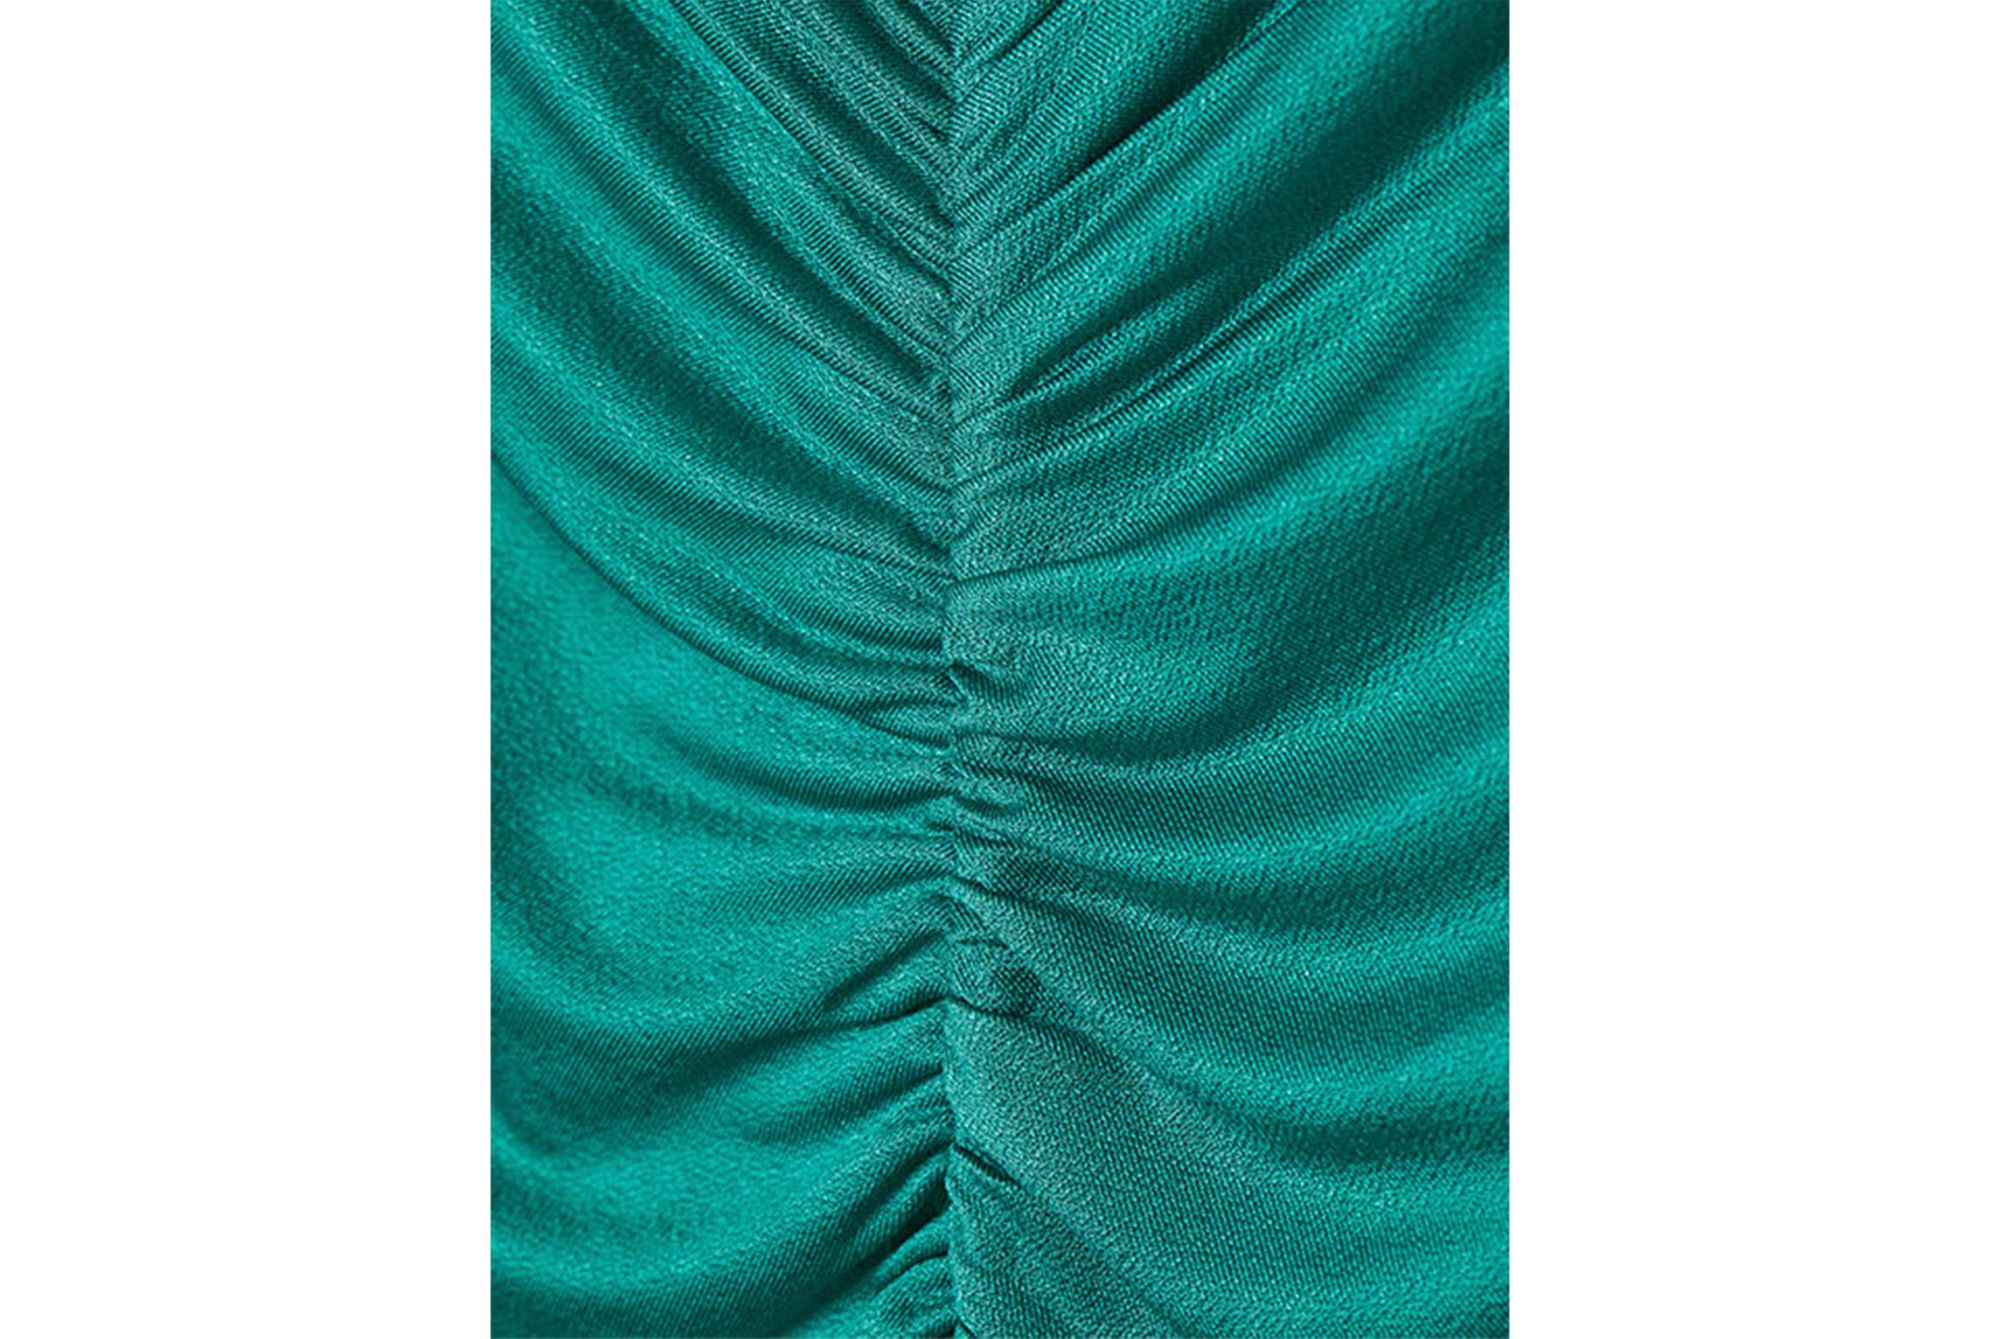 Close up of H&M brand emerald green dress made of 91% cellulose acetate Eastman Naia™ 